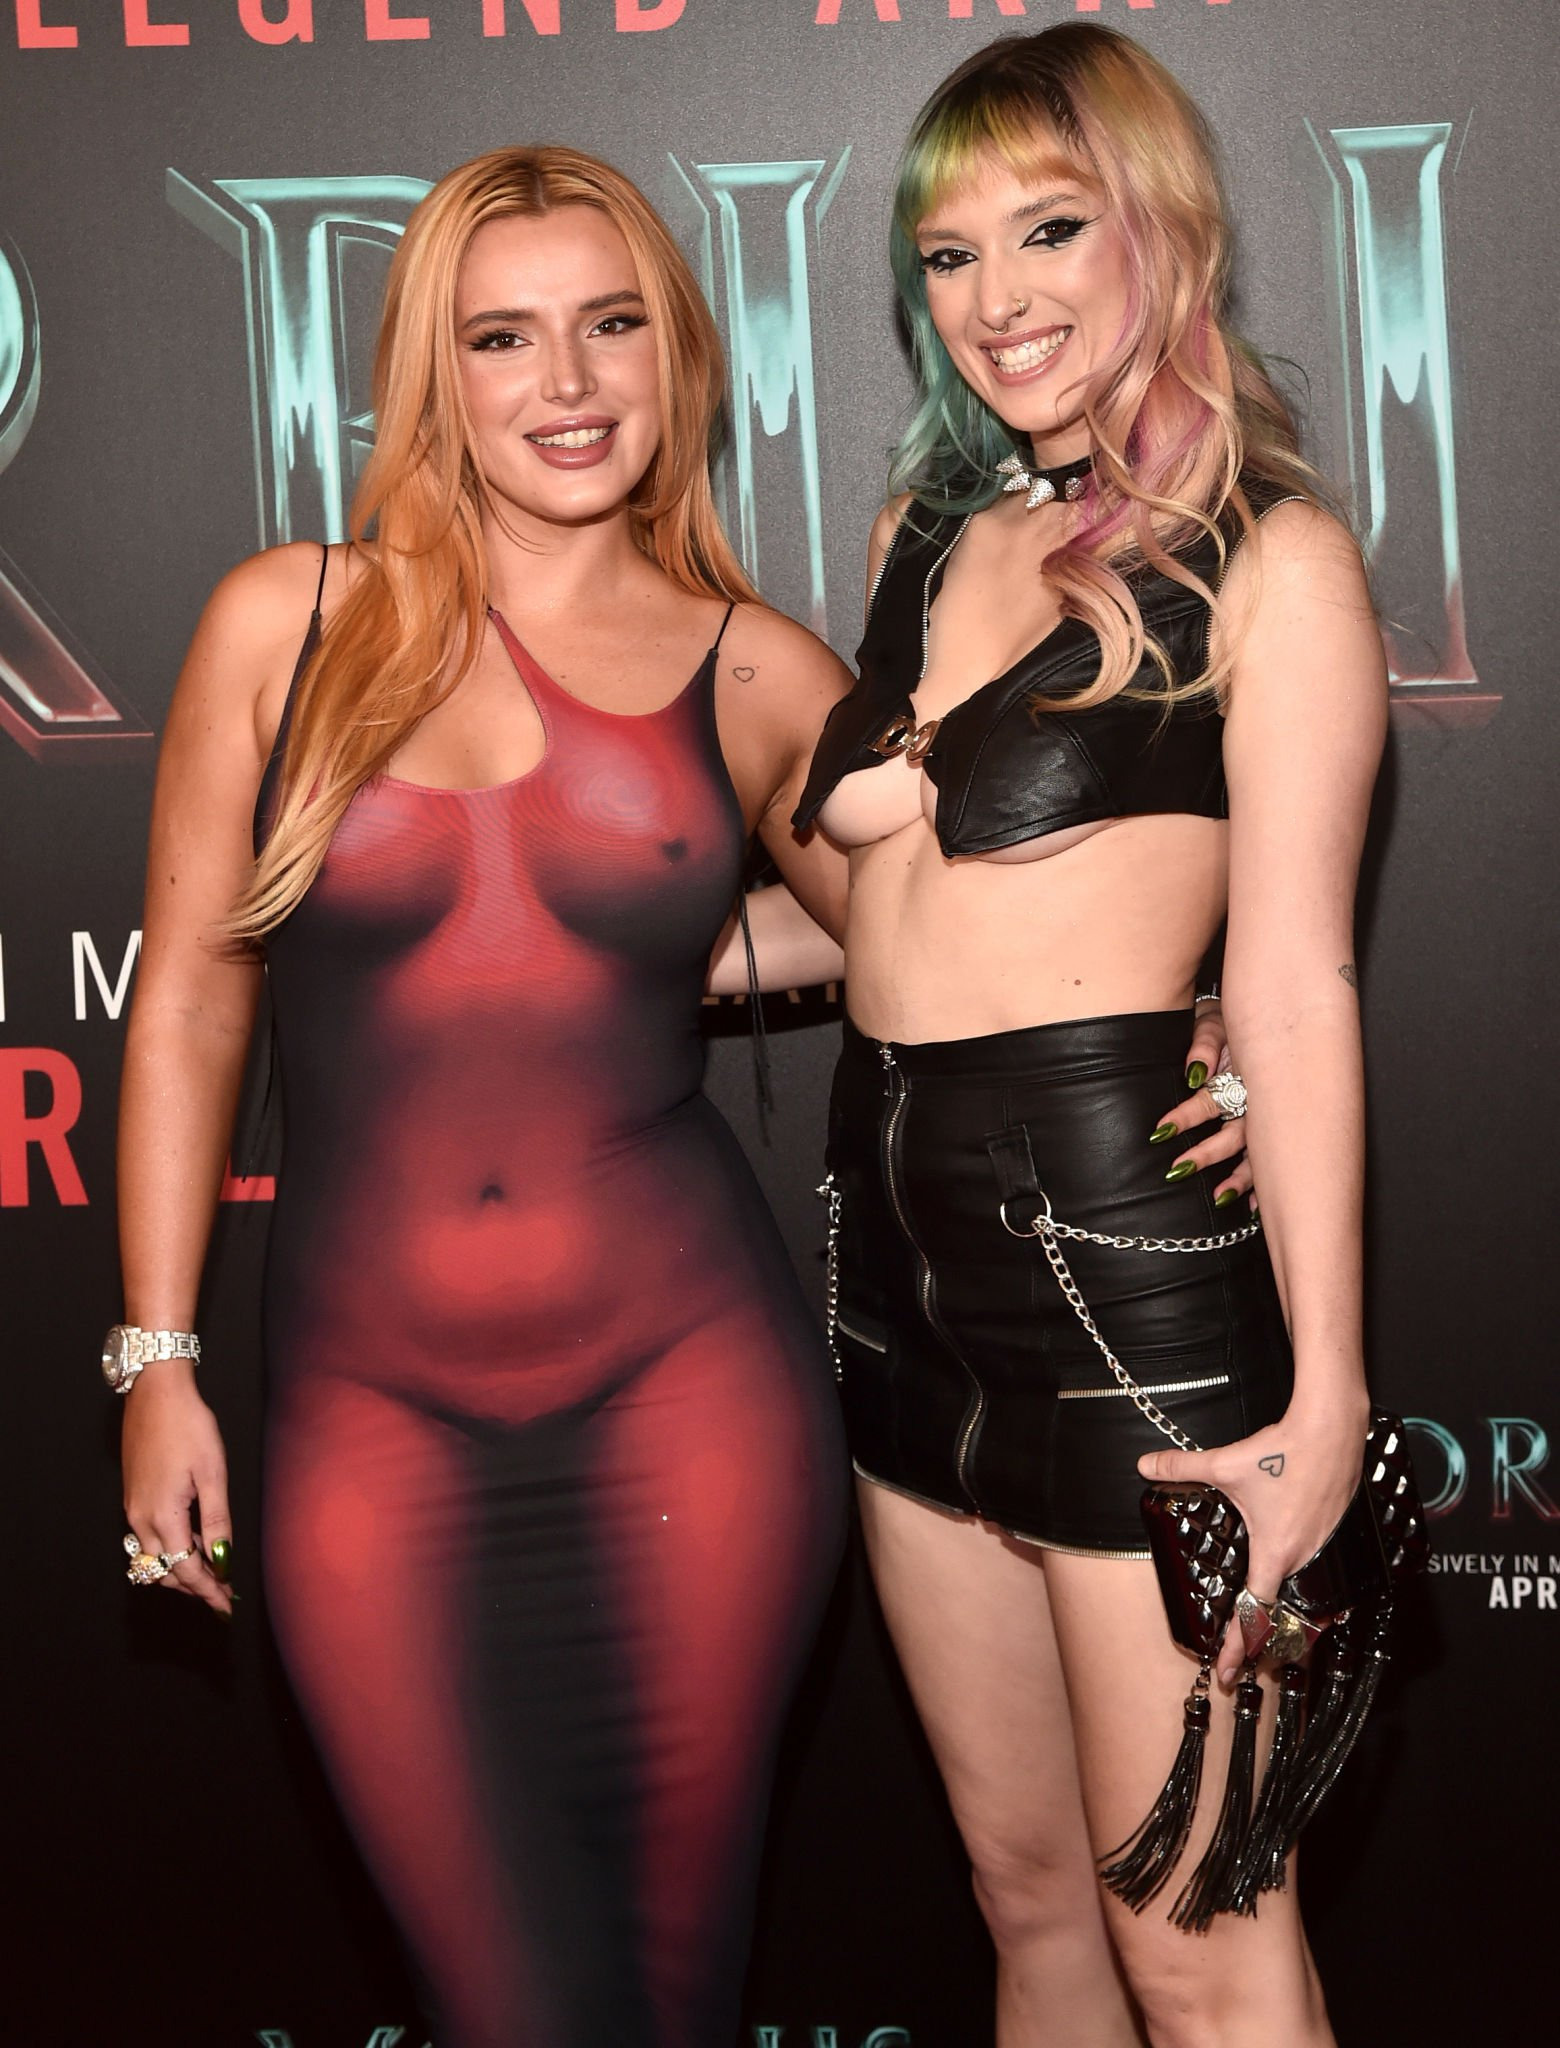 Fabulous Blonde Bella Thorne Puts on a Really Slutty Outfit for the Morbius Premiere